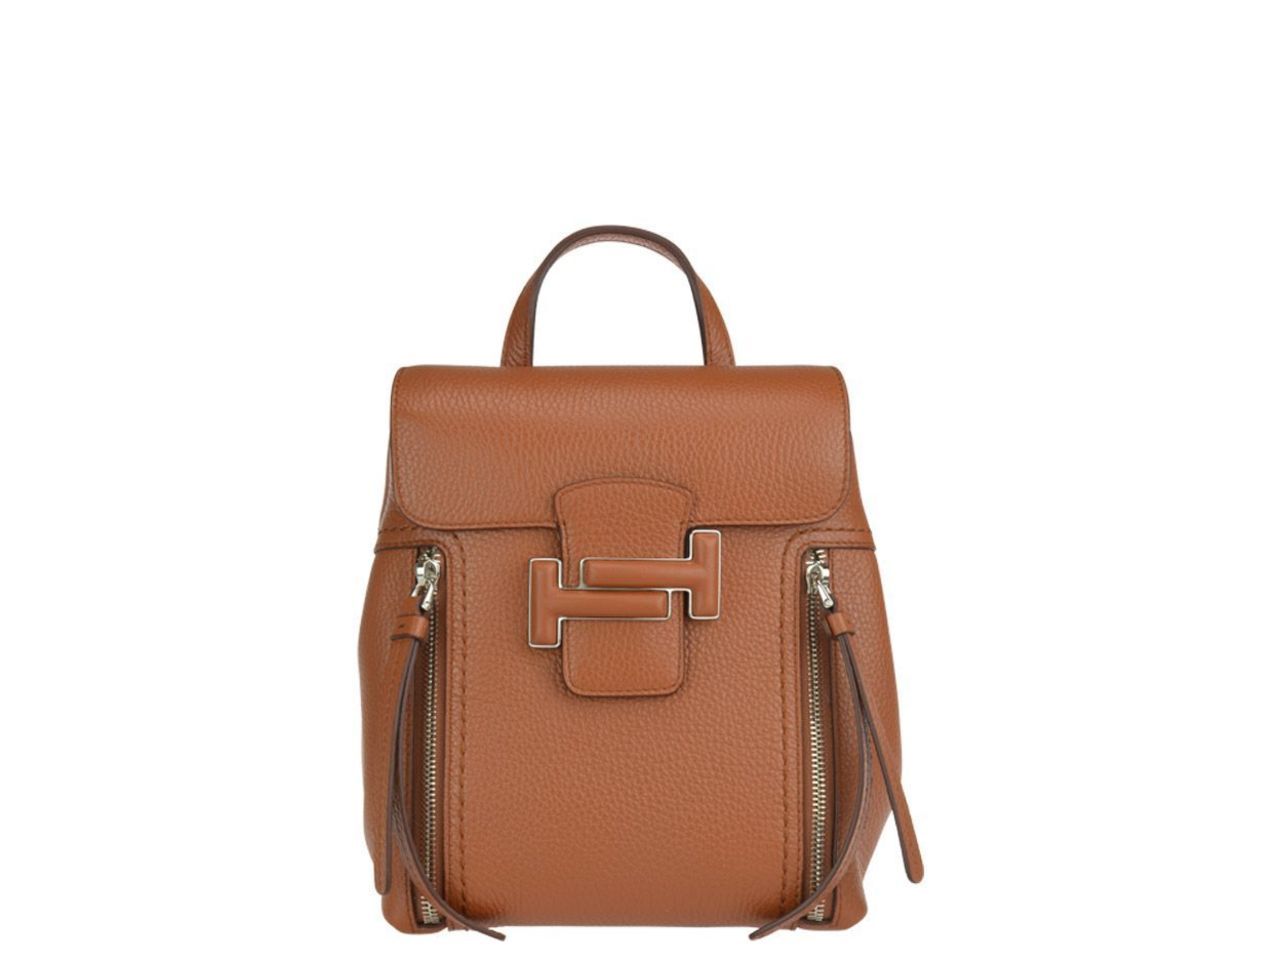 Tods Double T Backpack